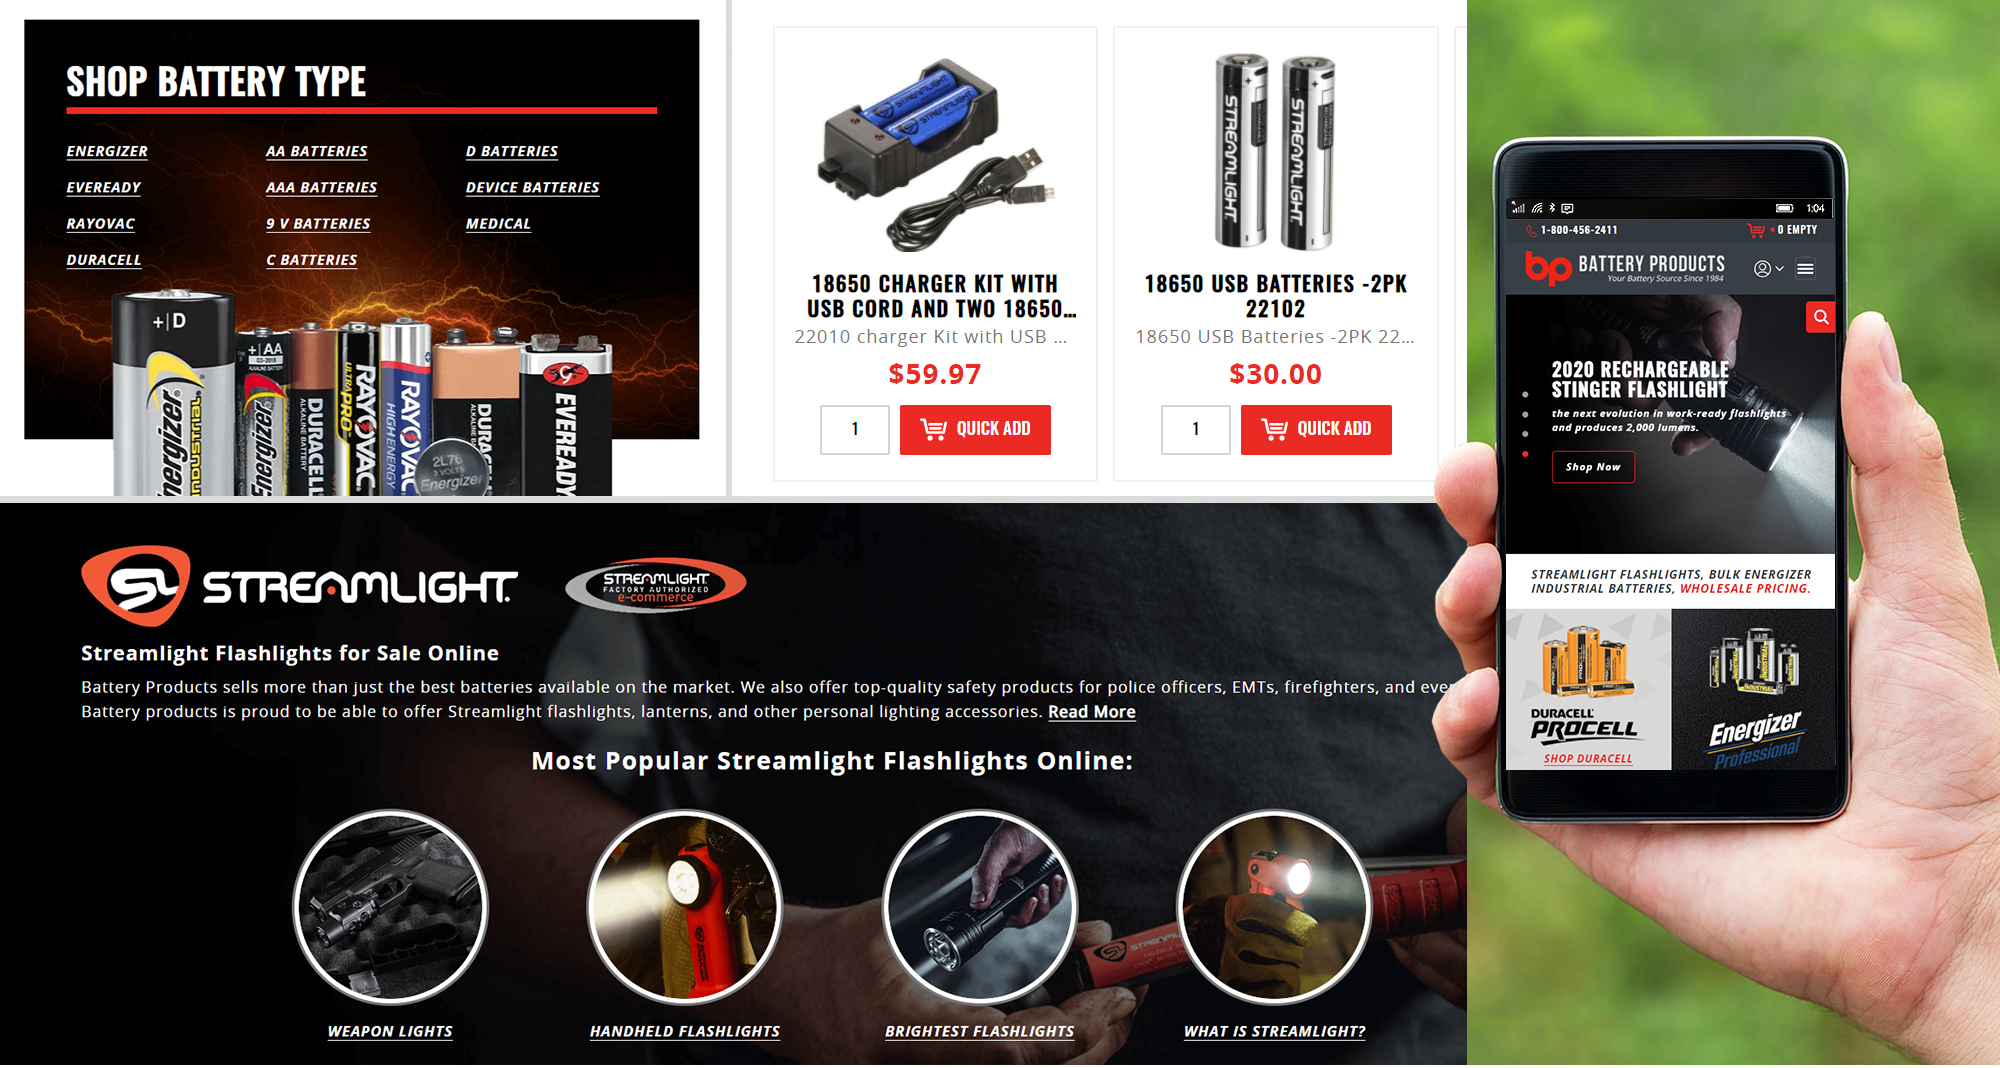 Milwaukee web marketing for Battery Products